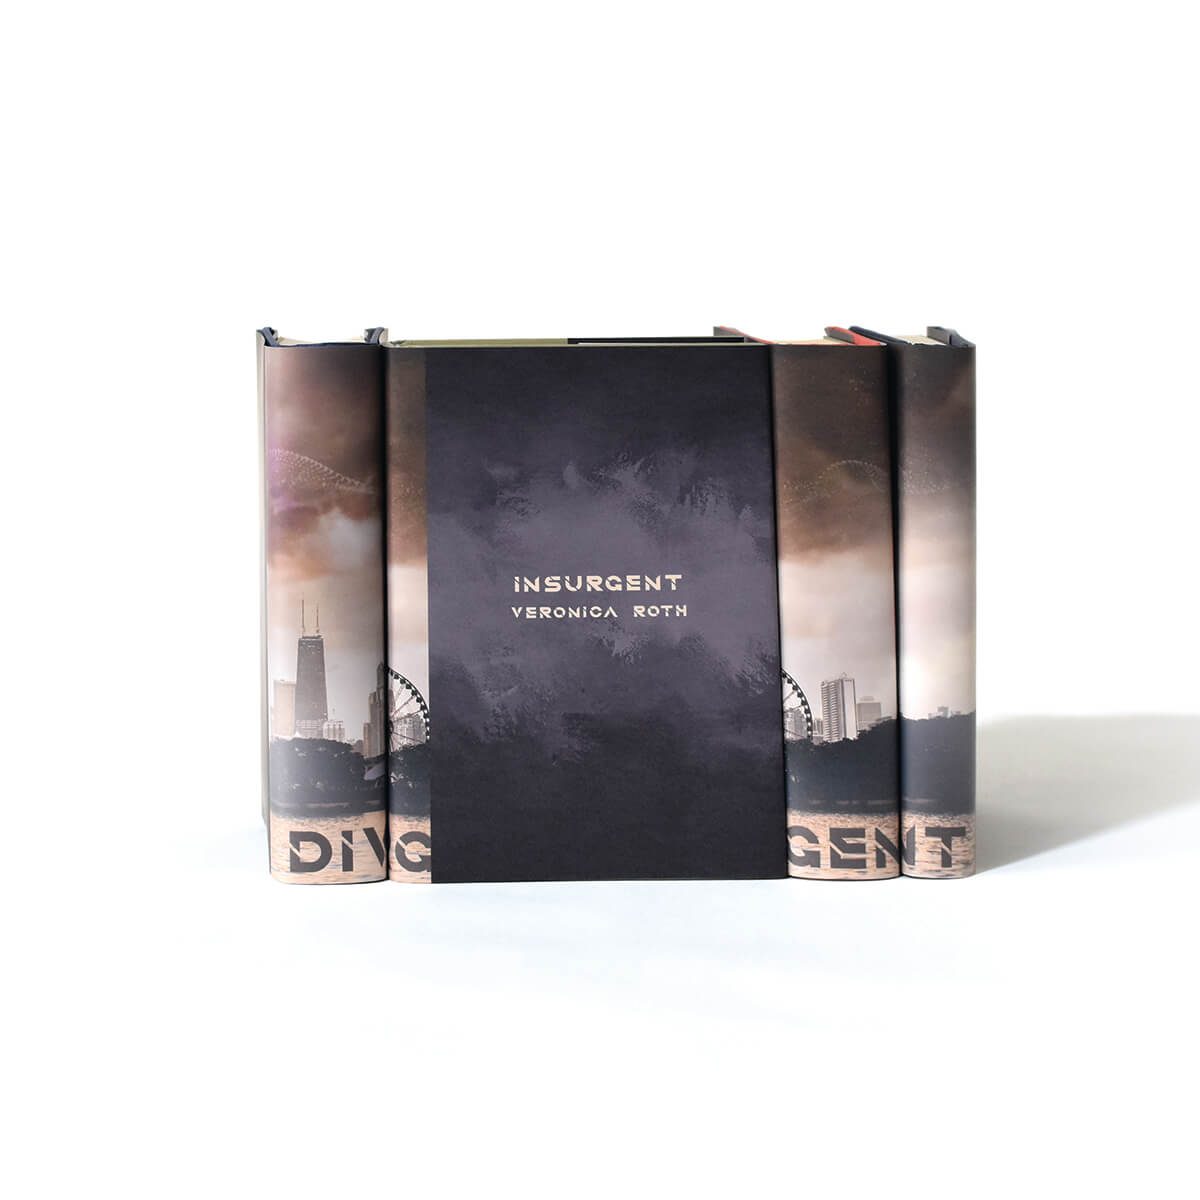 JuniperCustom Divergent Book Set, Our collections bring Veronica Roth's dystopian universe to life on your shelves!